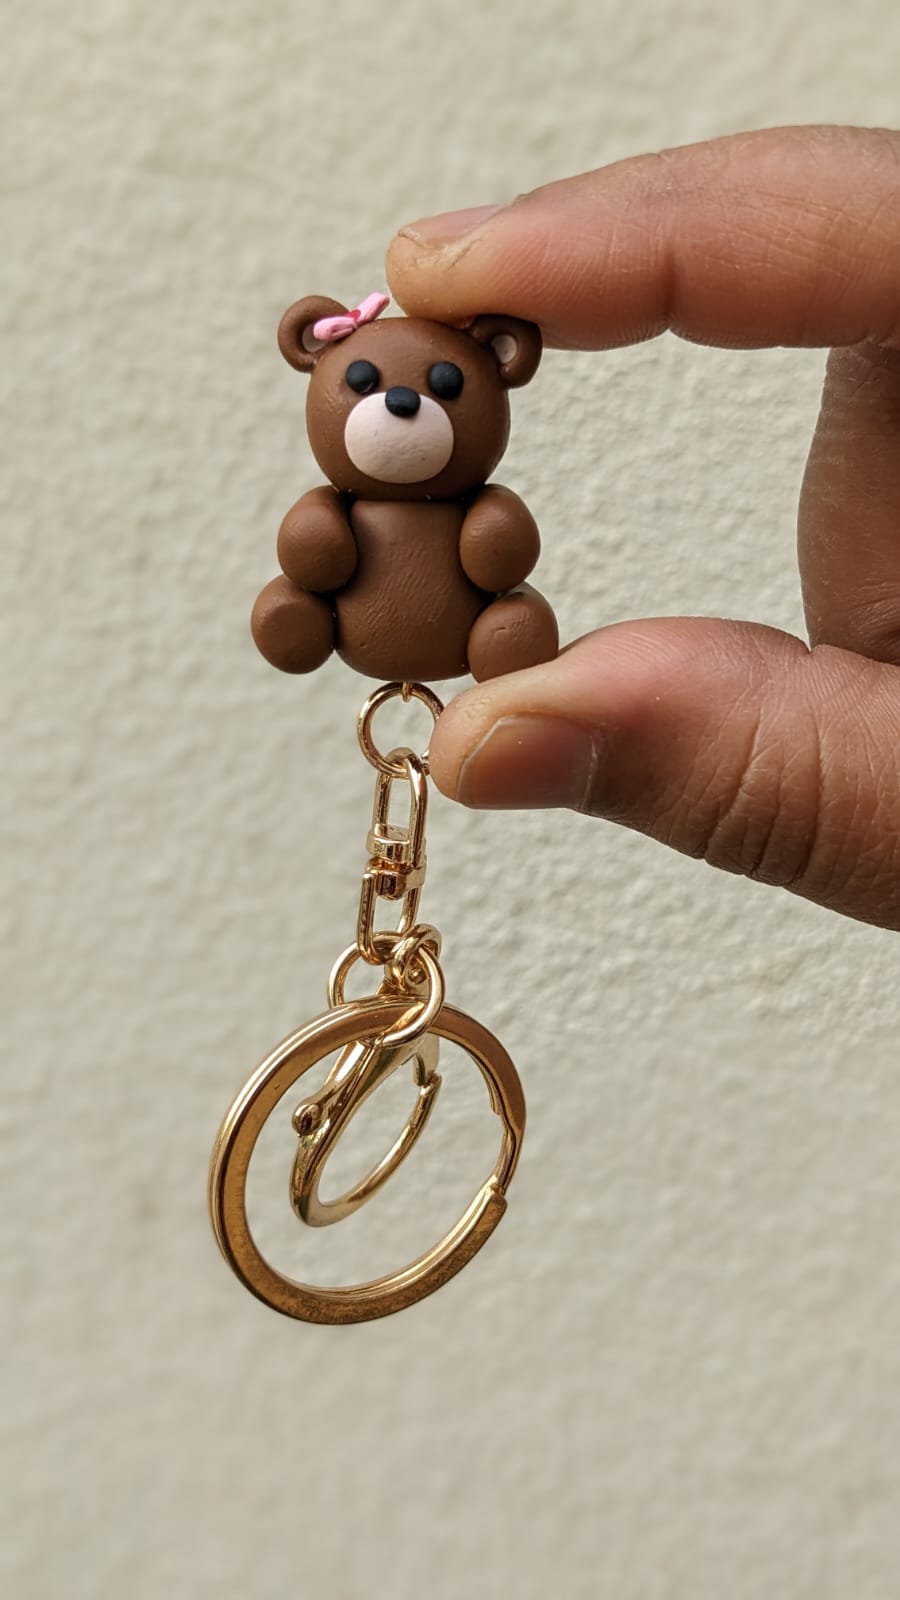 Bear key chain for her